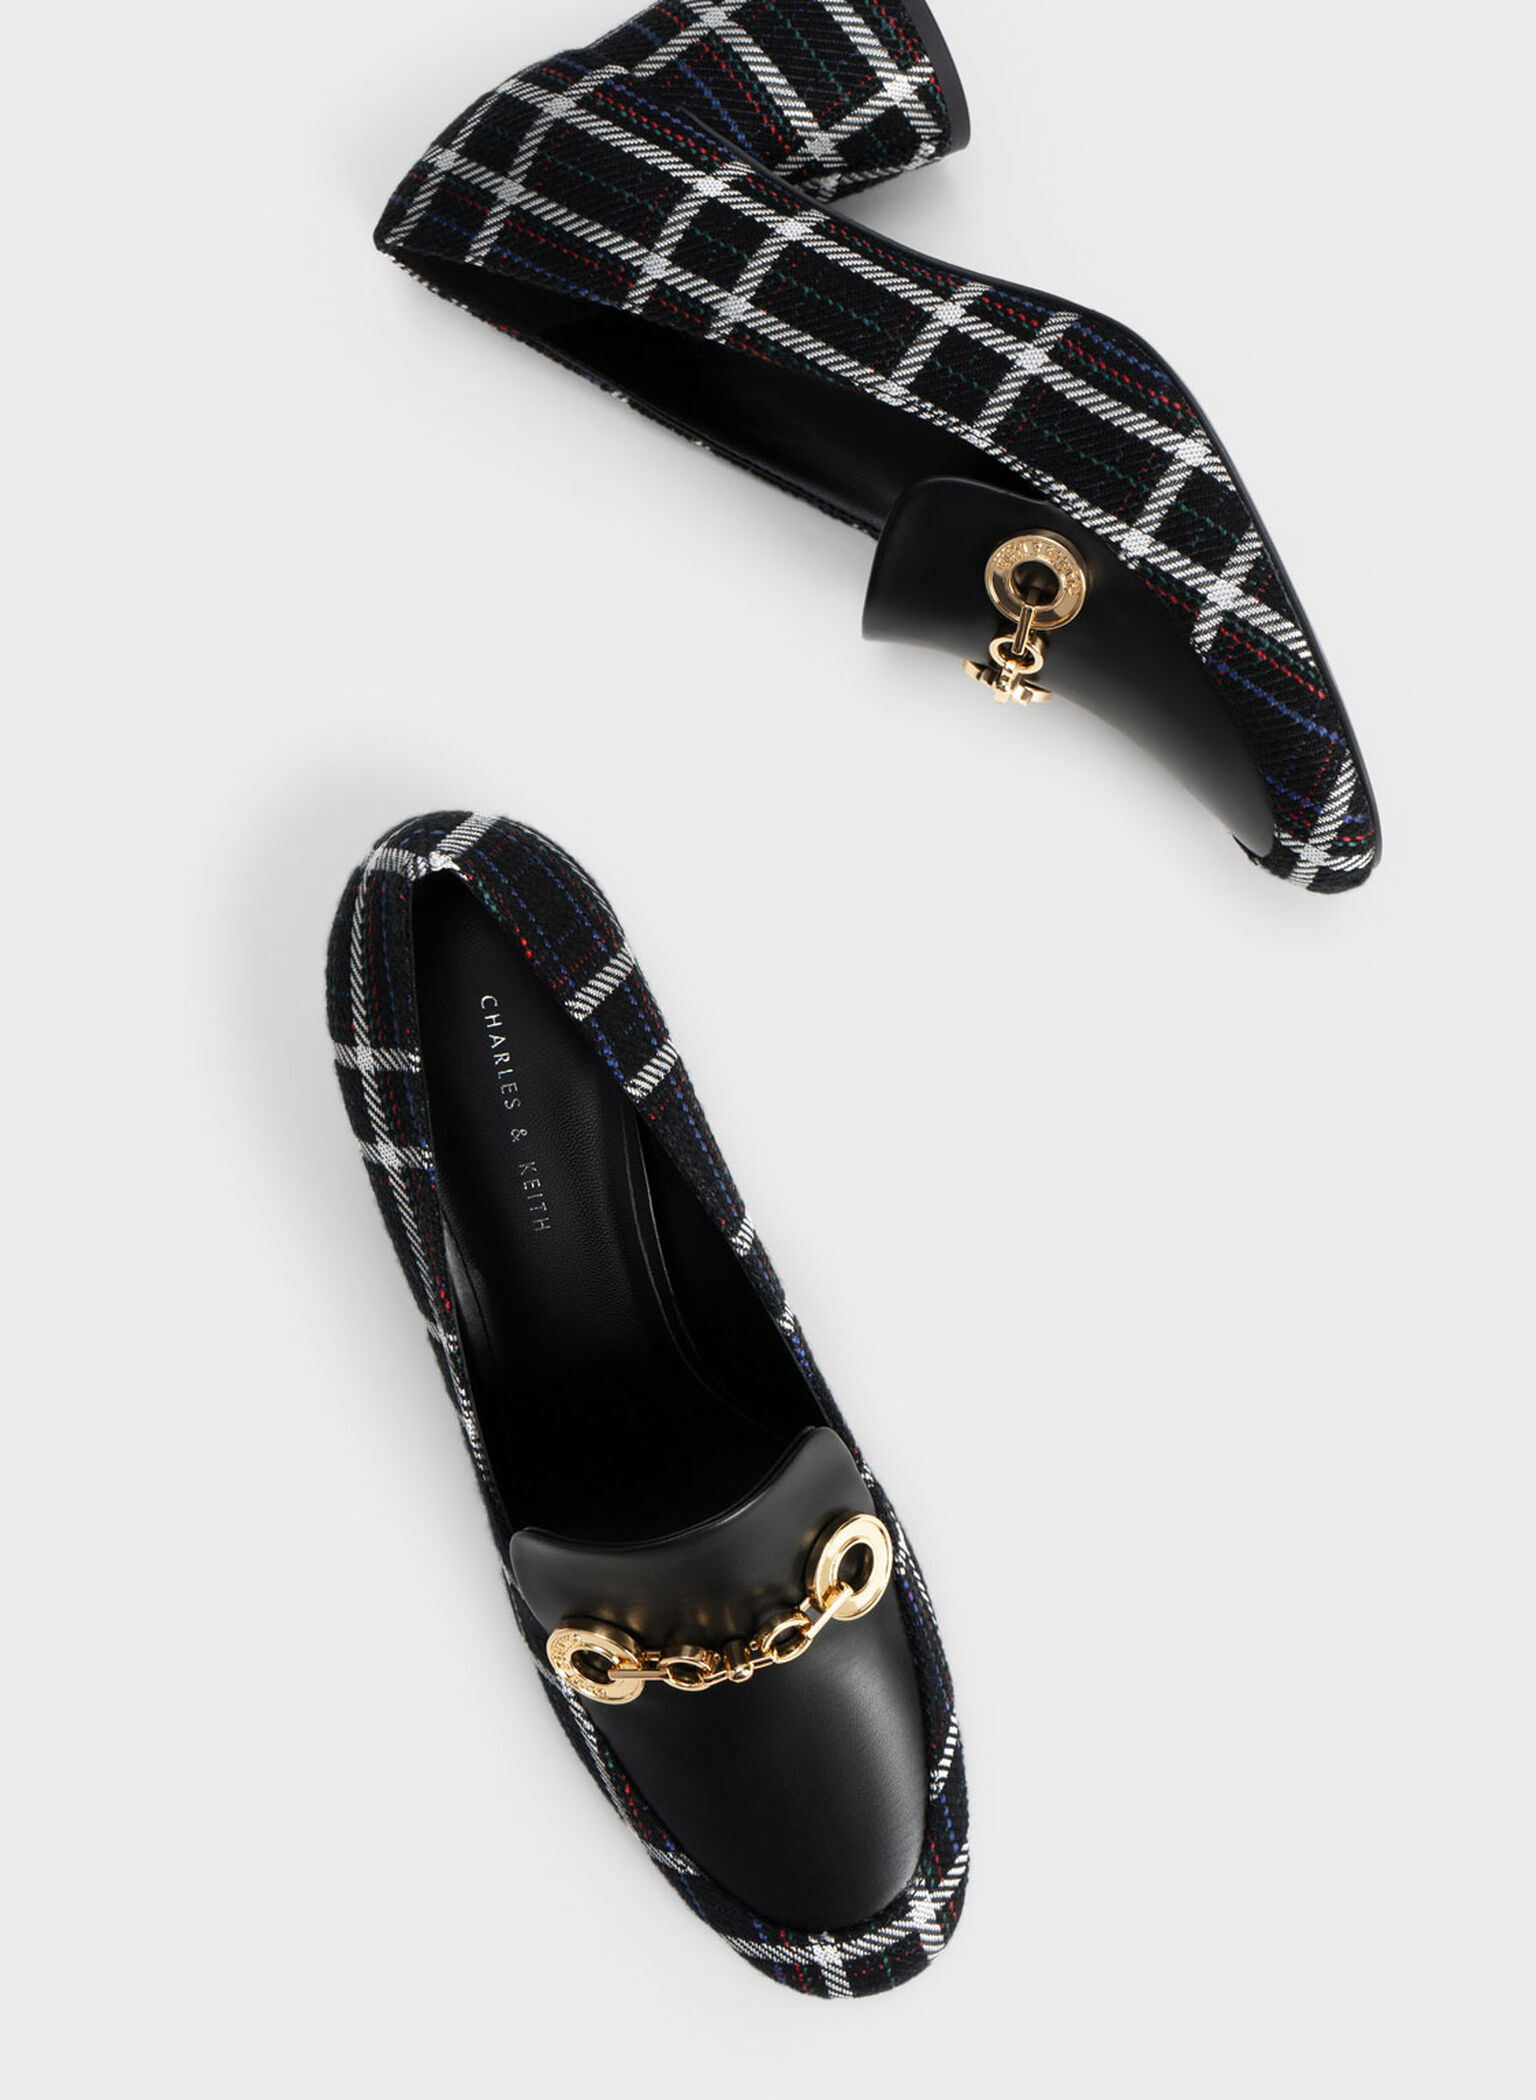 Circle Chain-Link Woven Loafer Pumps, Multi, hi-res